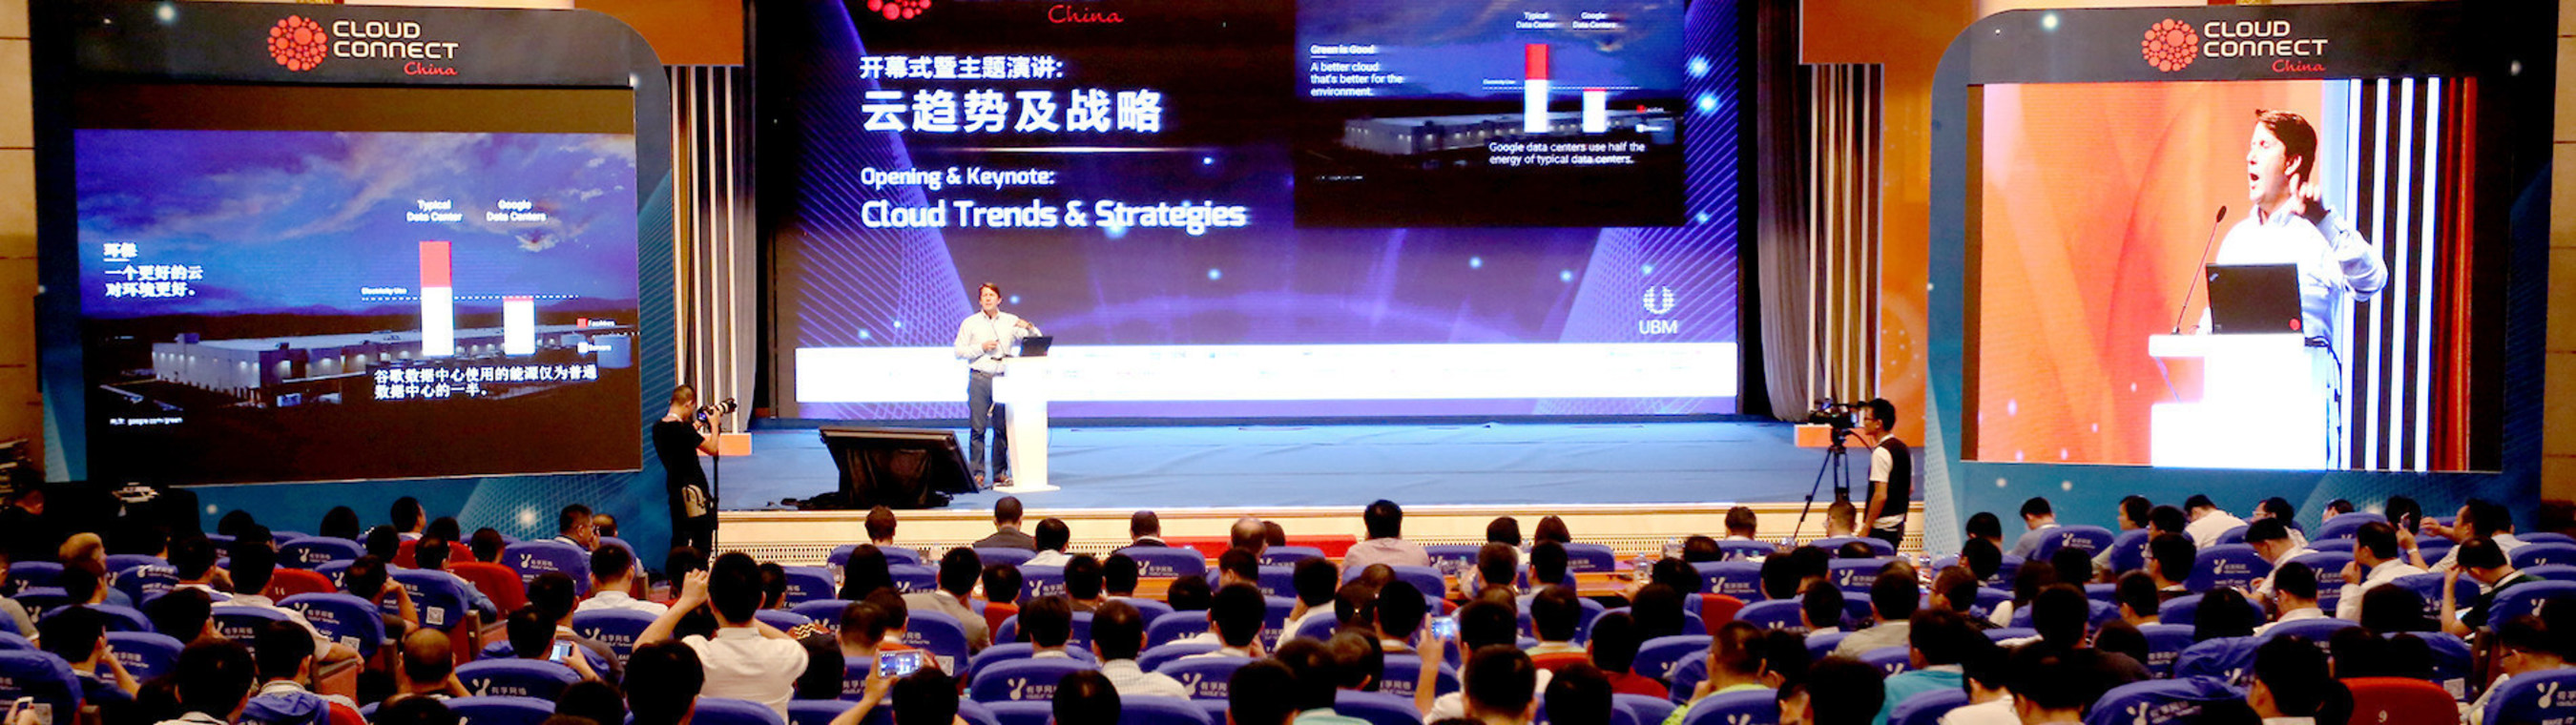 Onsite photo of Cloud Connect China 2015